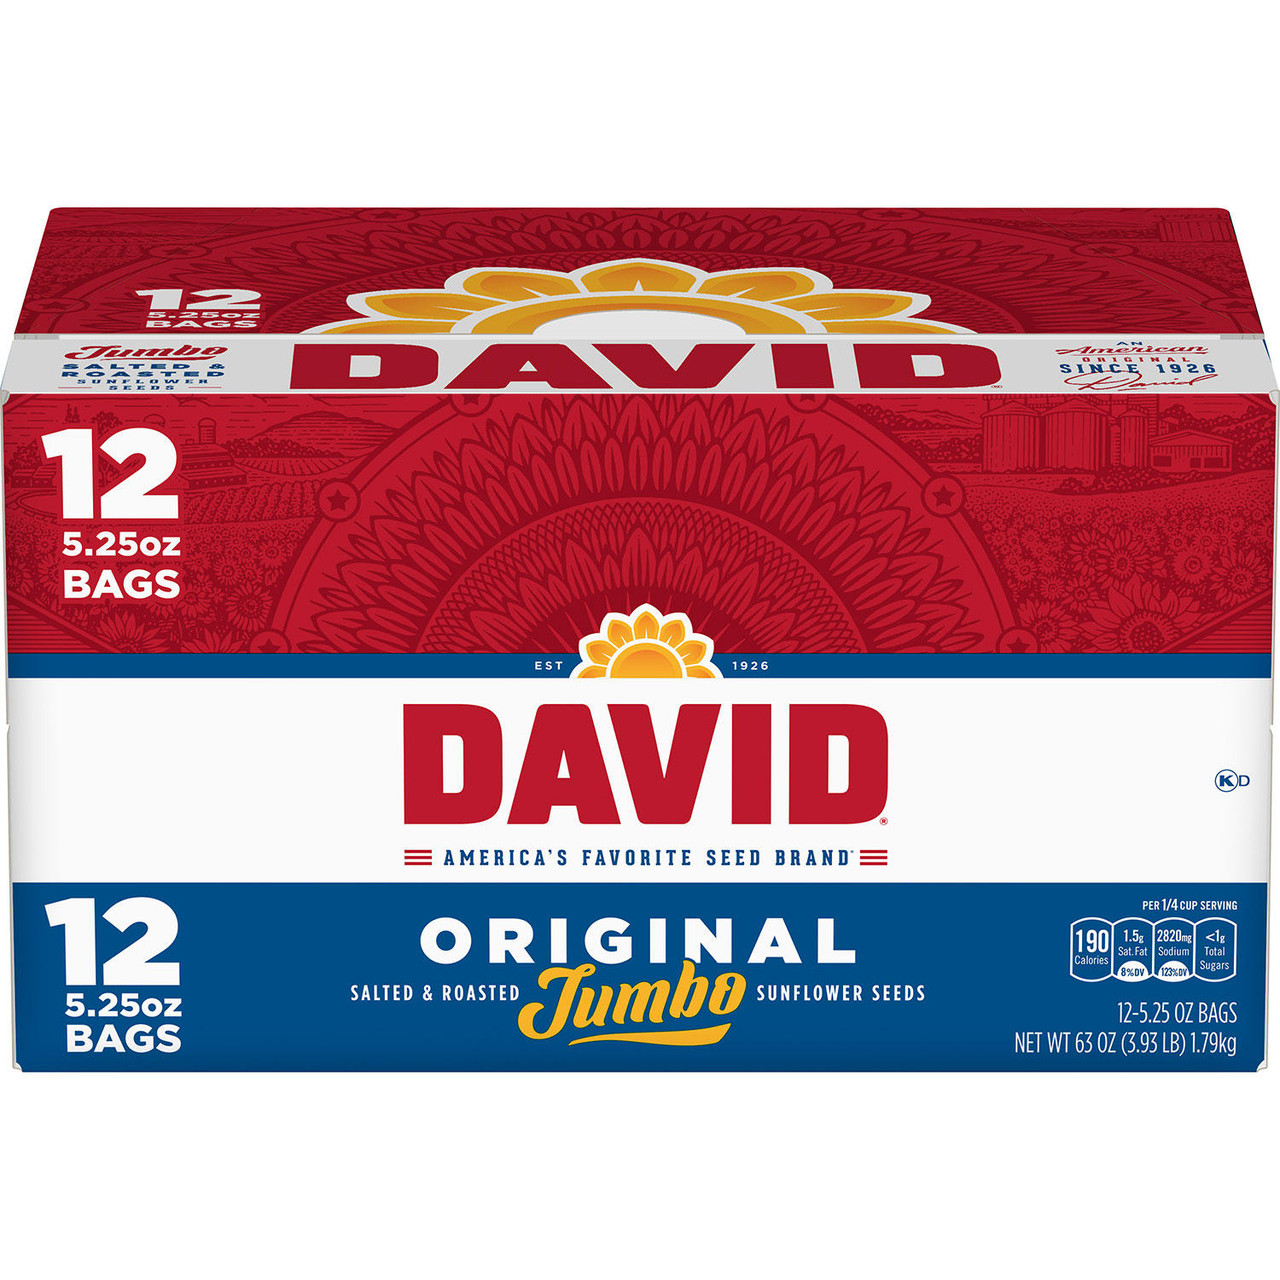 David Jumbo Sunflower Seeds (5.25 oz., 12 ct.) - [From 55.00 - Choose pk Qty ] - *Ships from Miami